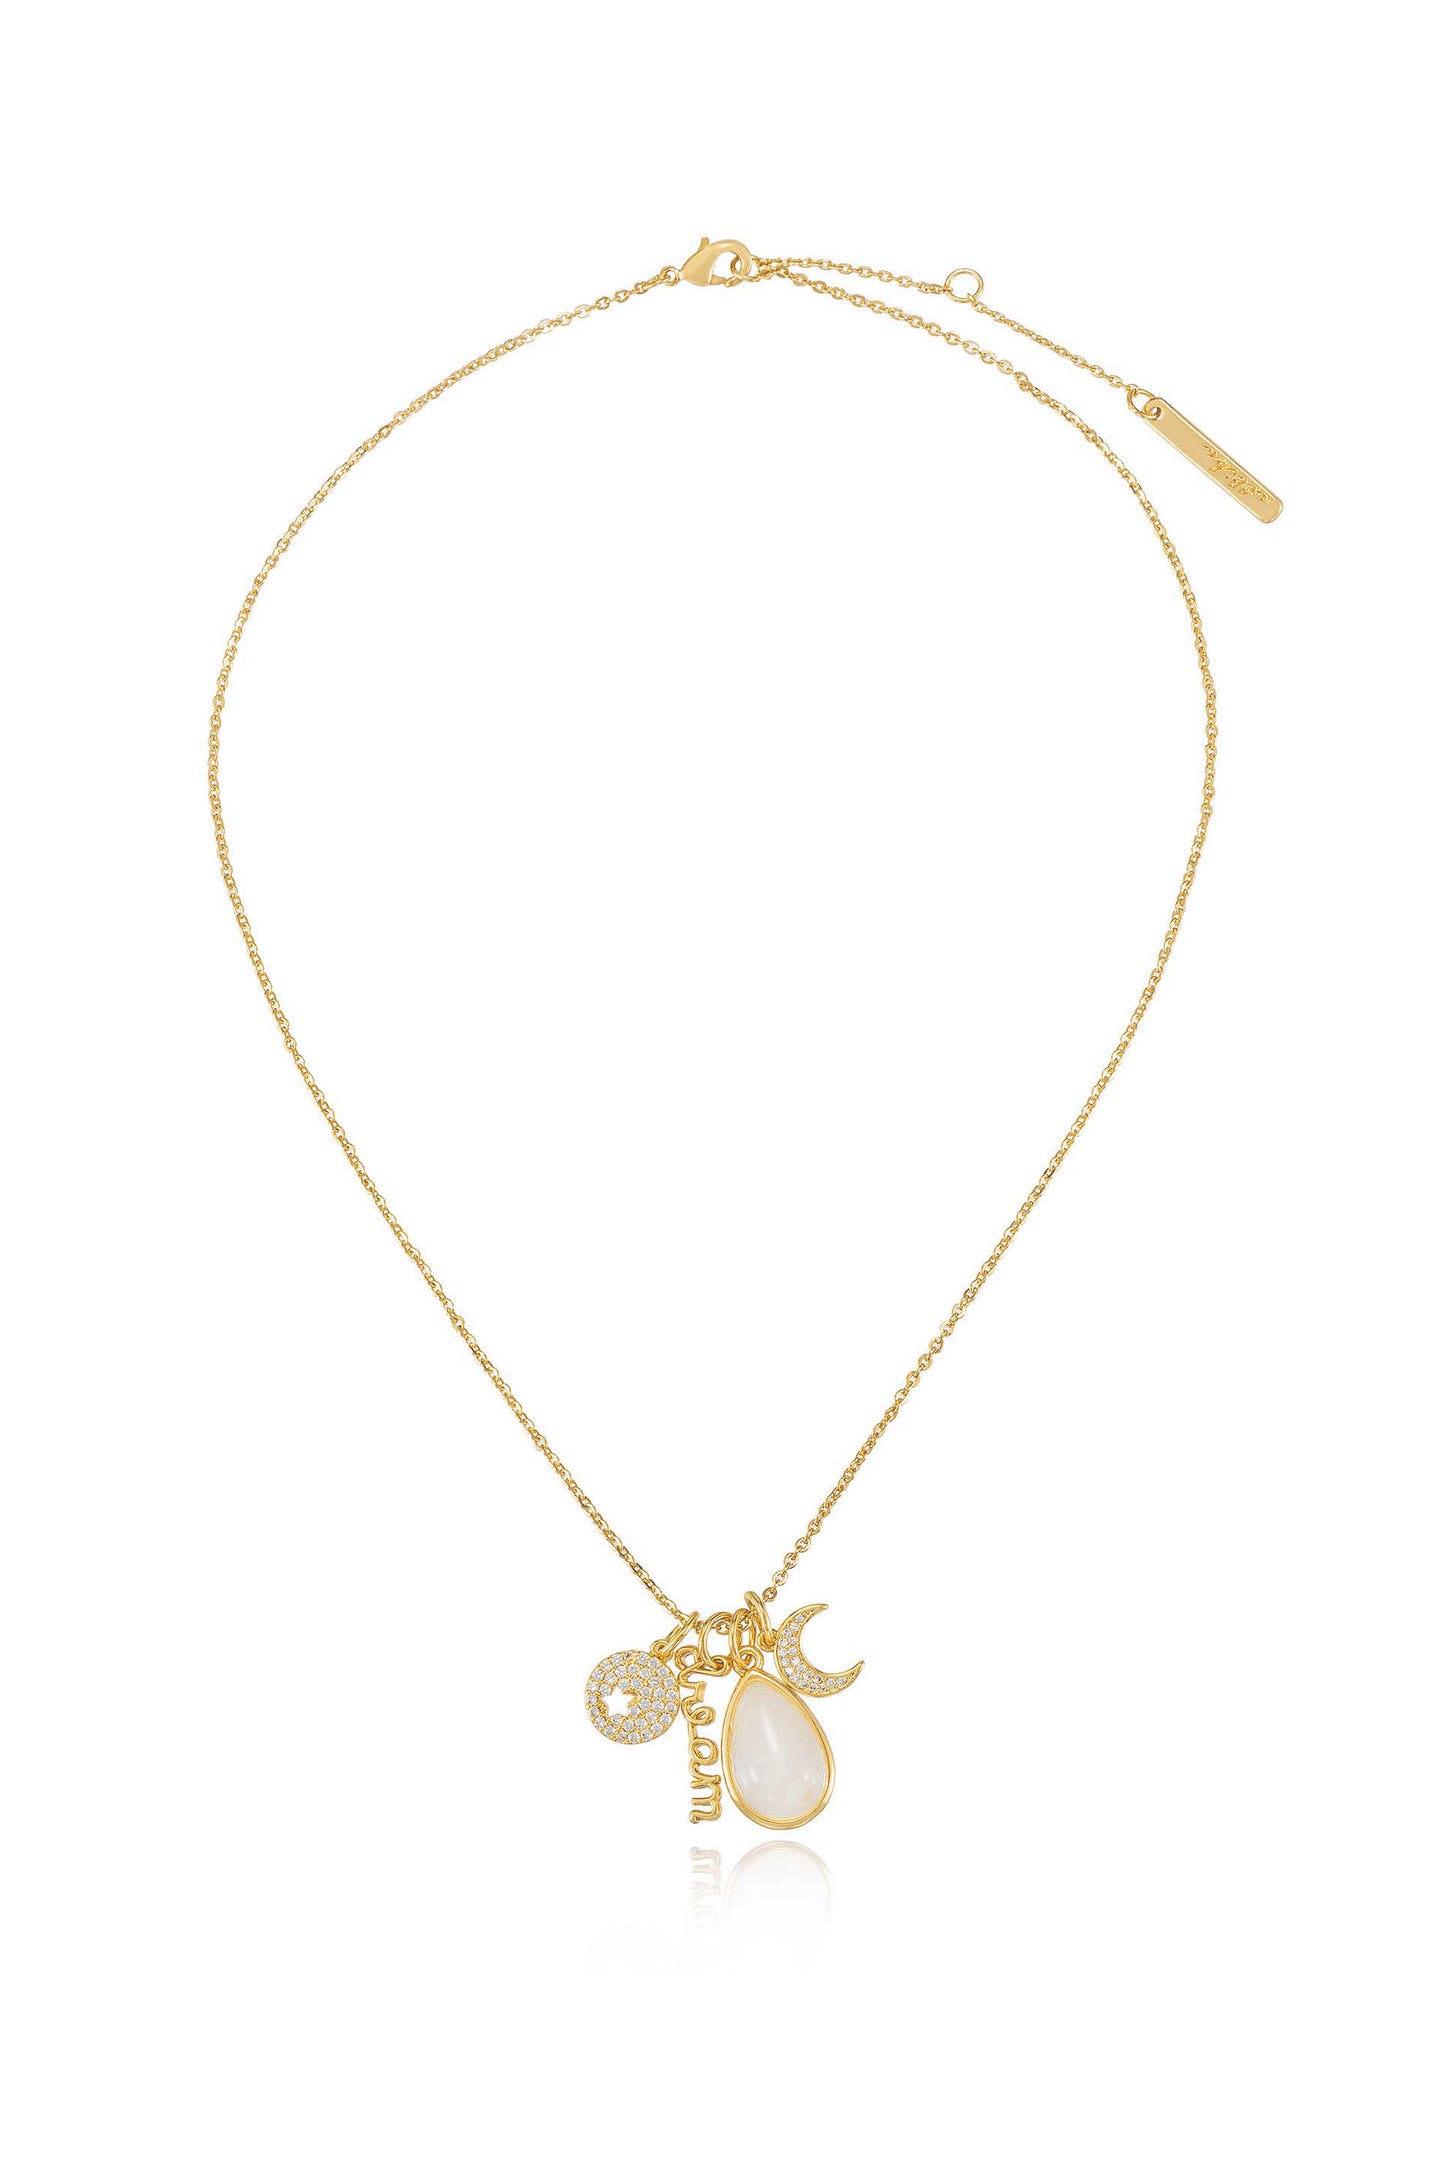 Dream Baby Dream 18k Gold Plated Interchangeable Charm Necklace full